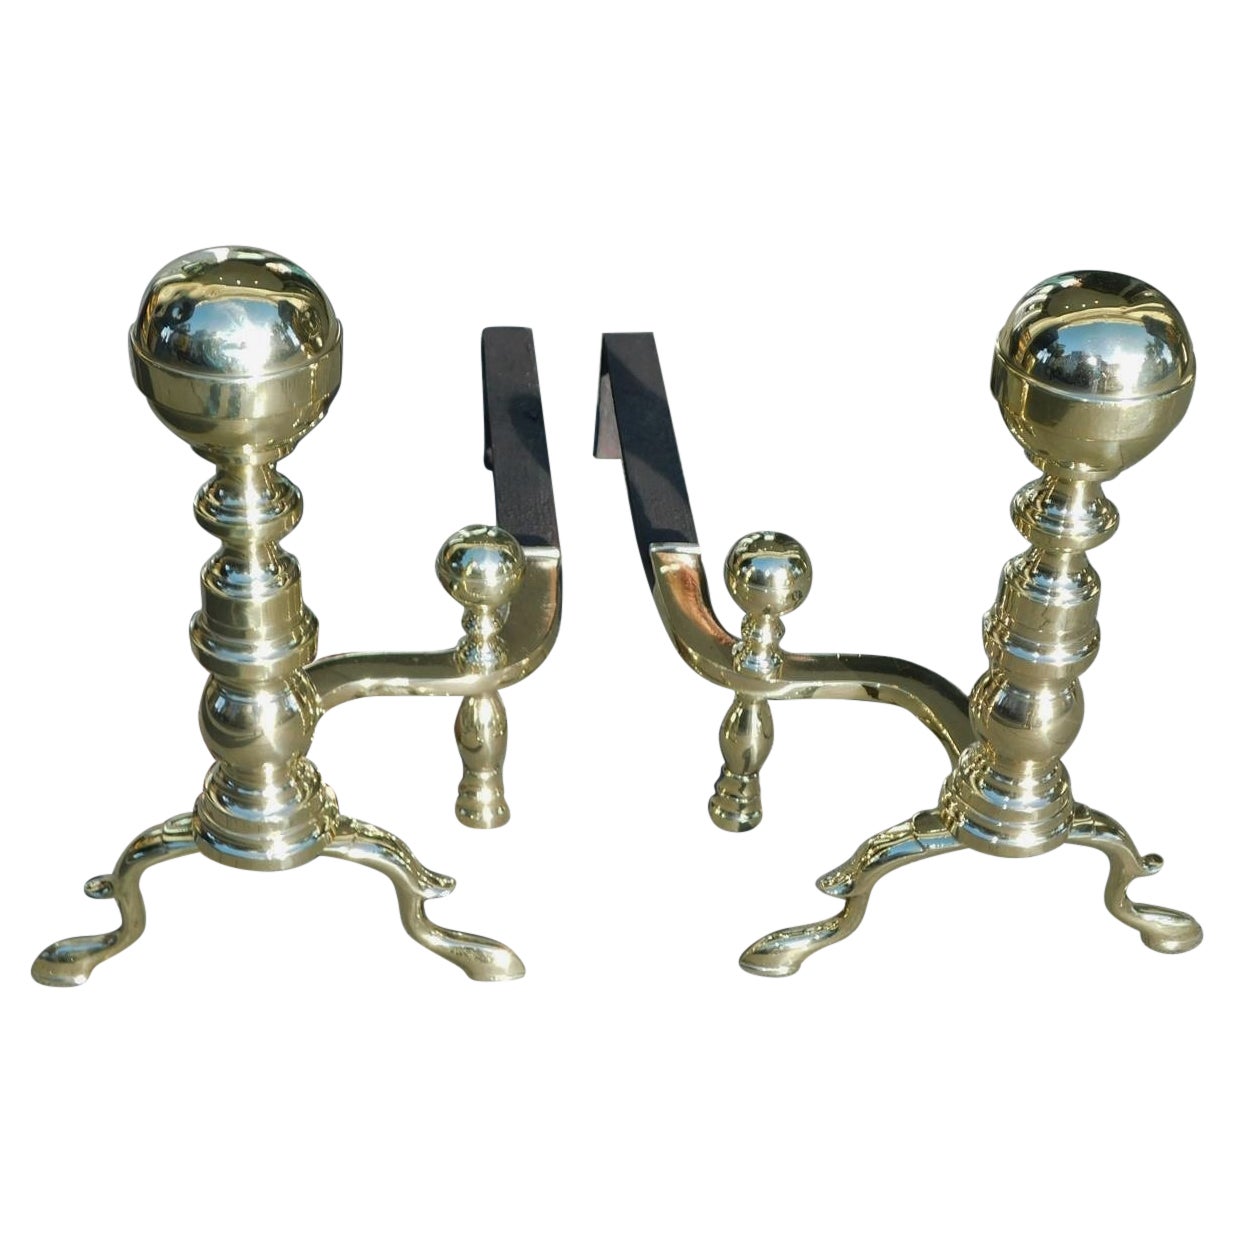 Pair of American Brass Ball Finial Andirons with Matching Log Stops, Circa 1800